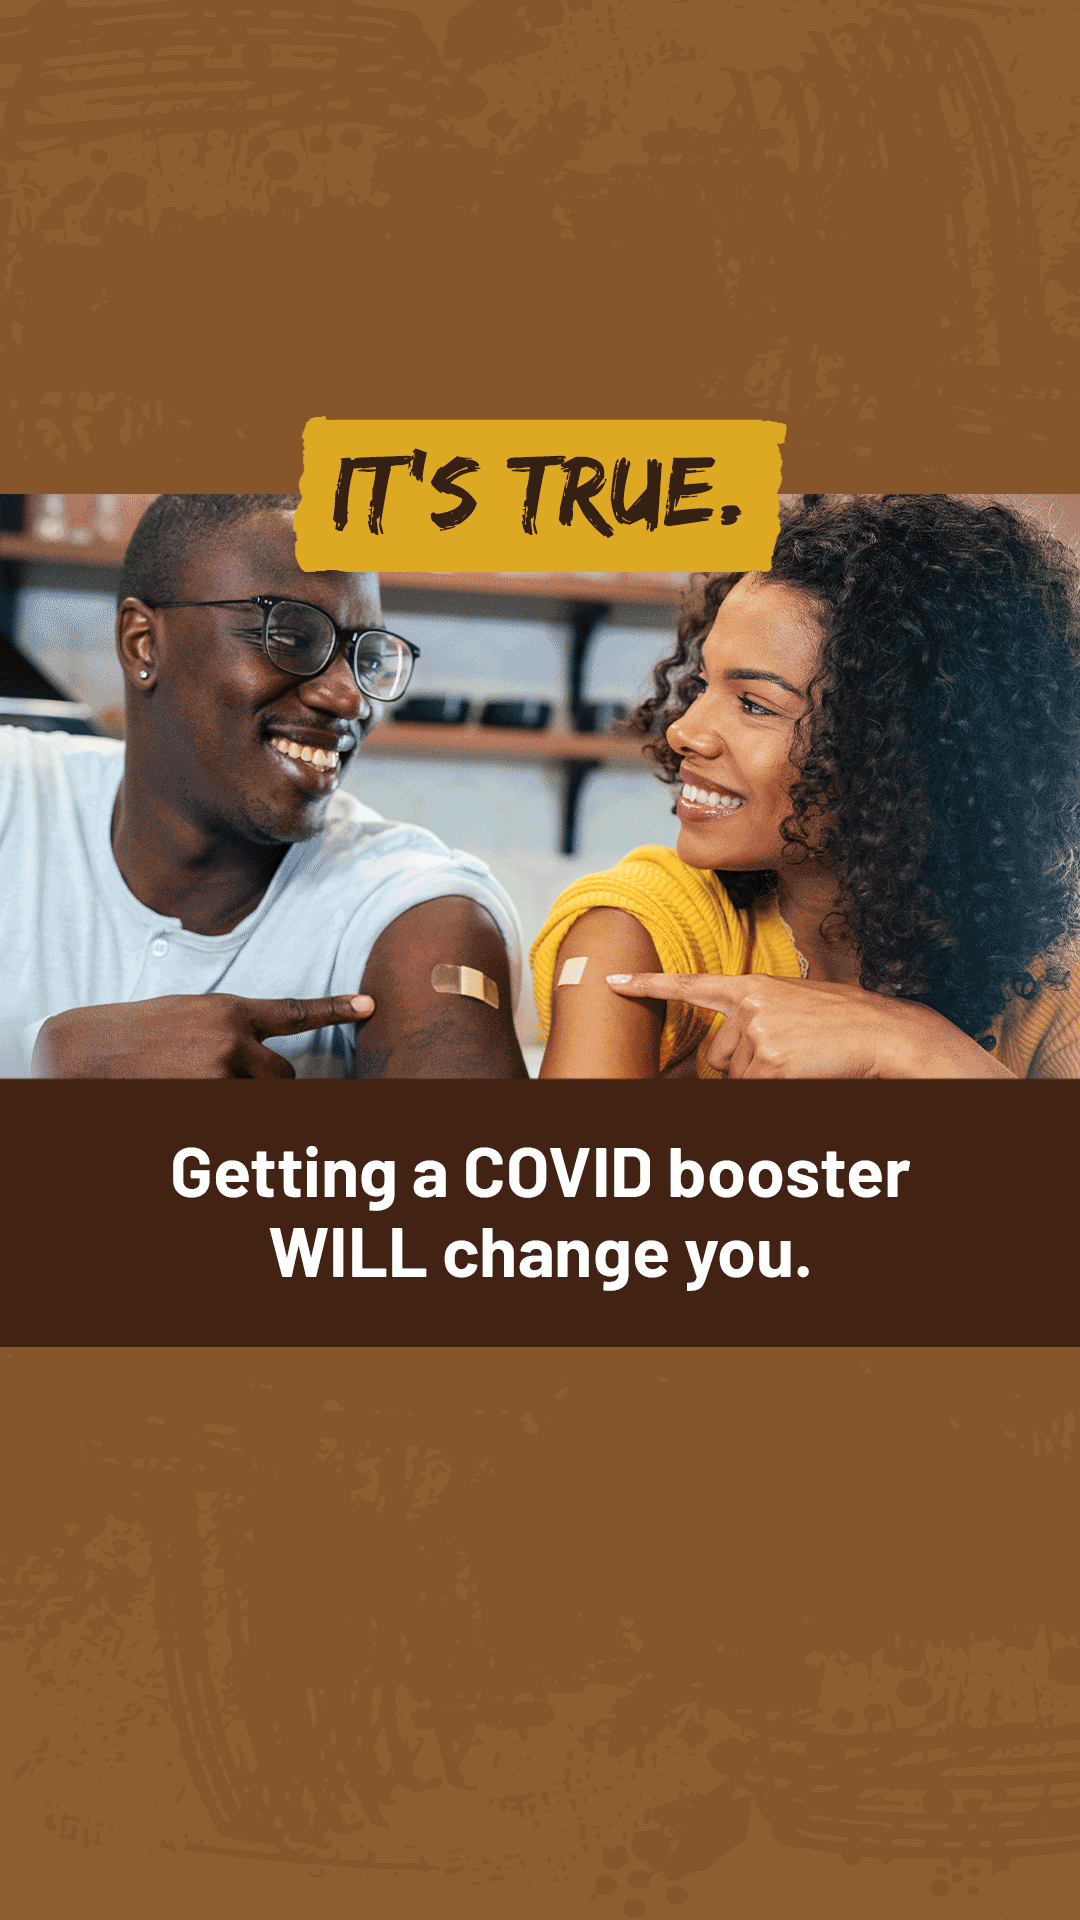 A Black adult man and woman smile at each other. Text reads, "It's true. Getting a COVID booster will change you."